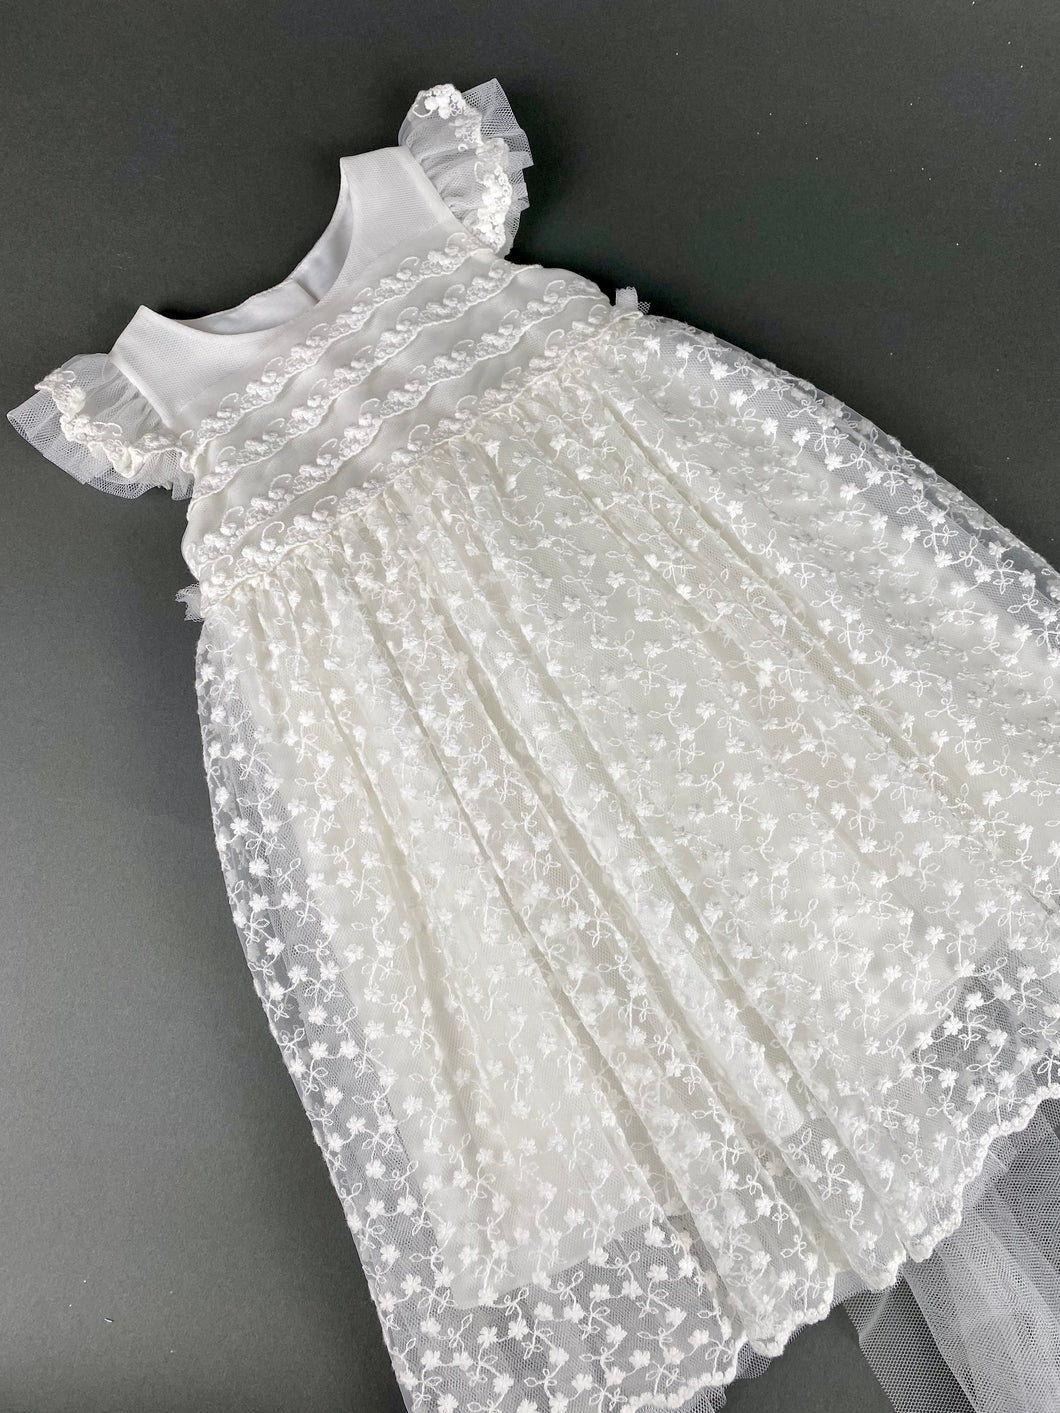 Dress 66 Girls Baptismal Christening Embroidered French Lace with Cap Sleeves, matching Bolero and Hat. Made in Greece exclusively for Rosies Collections